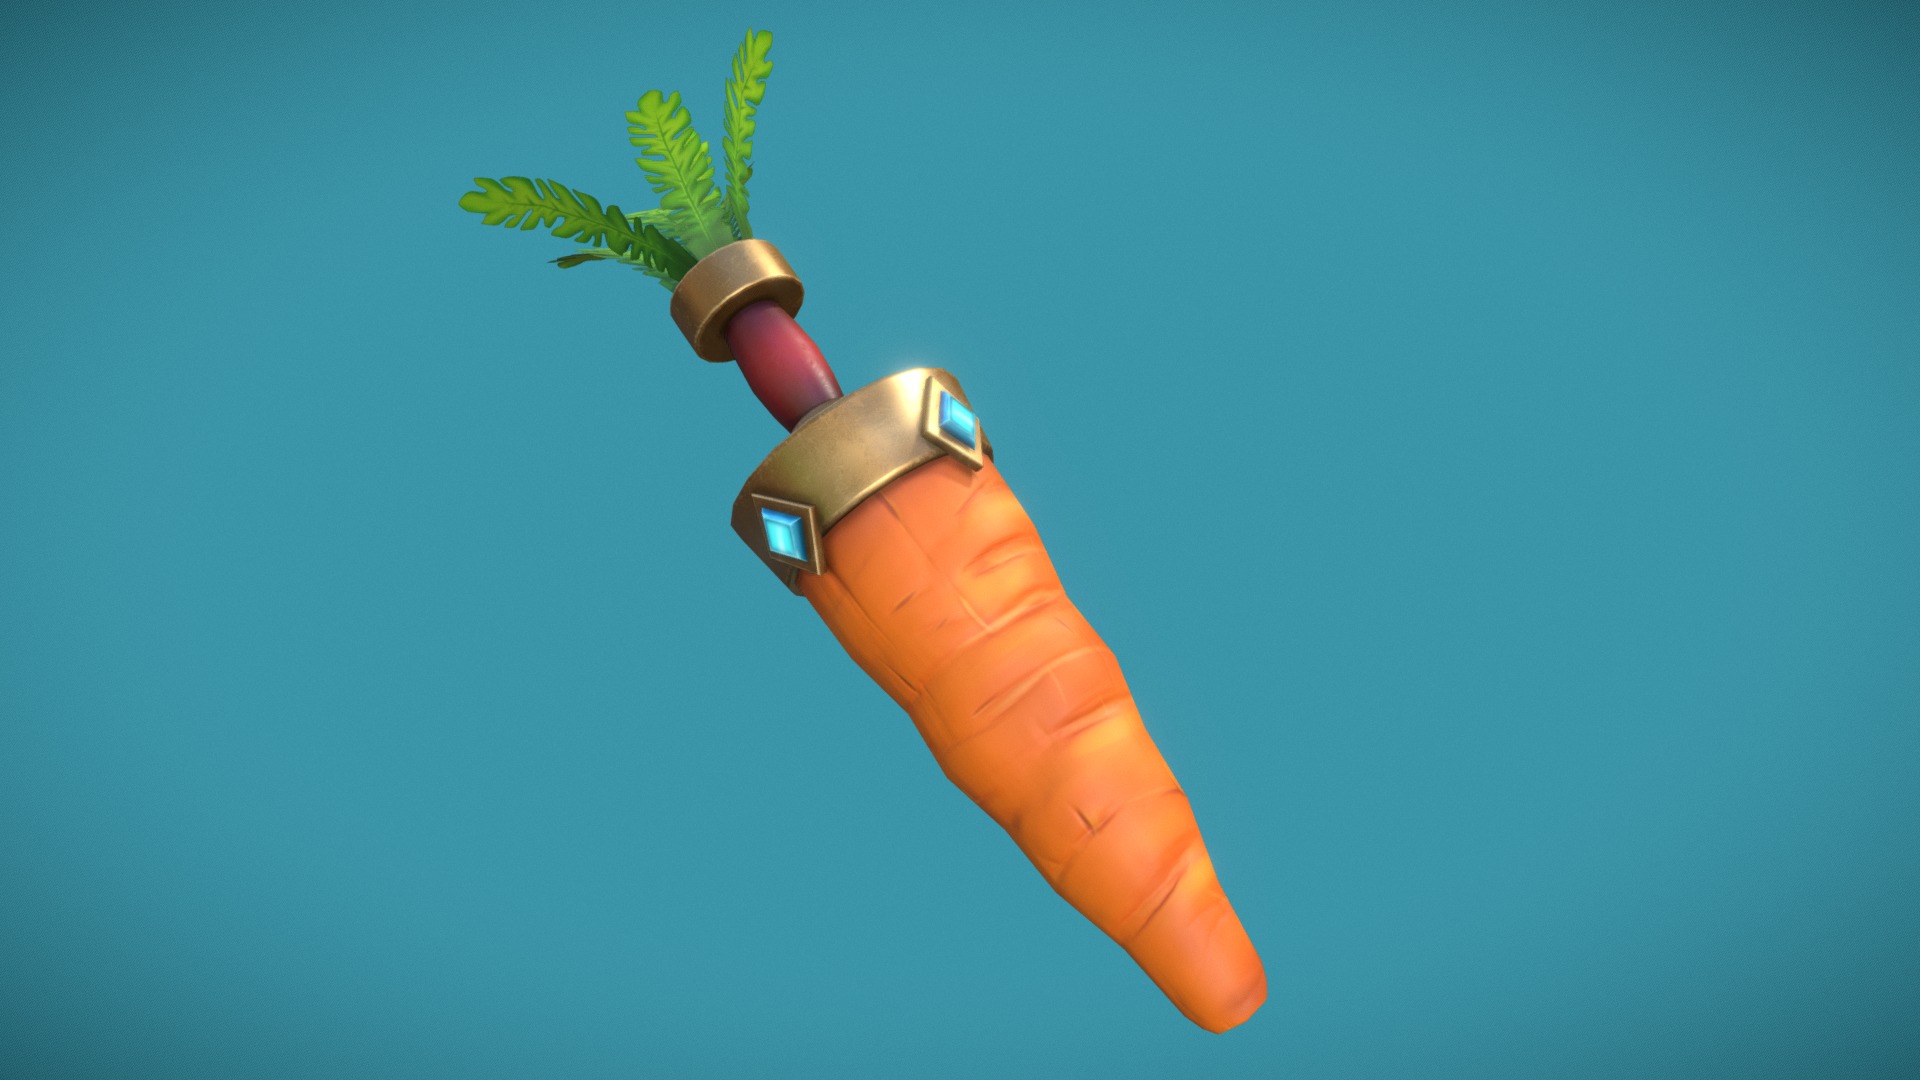 I did it for the contest #WeaponChallenge
I used Maya / Zbrush for model and Substance / Photoshop for texture - Carrot Sword - 3D model by Giovanni Caruso (@giovannicaruso) 3d model